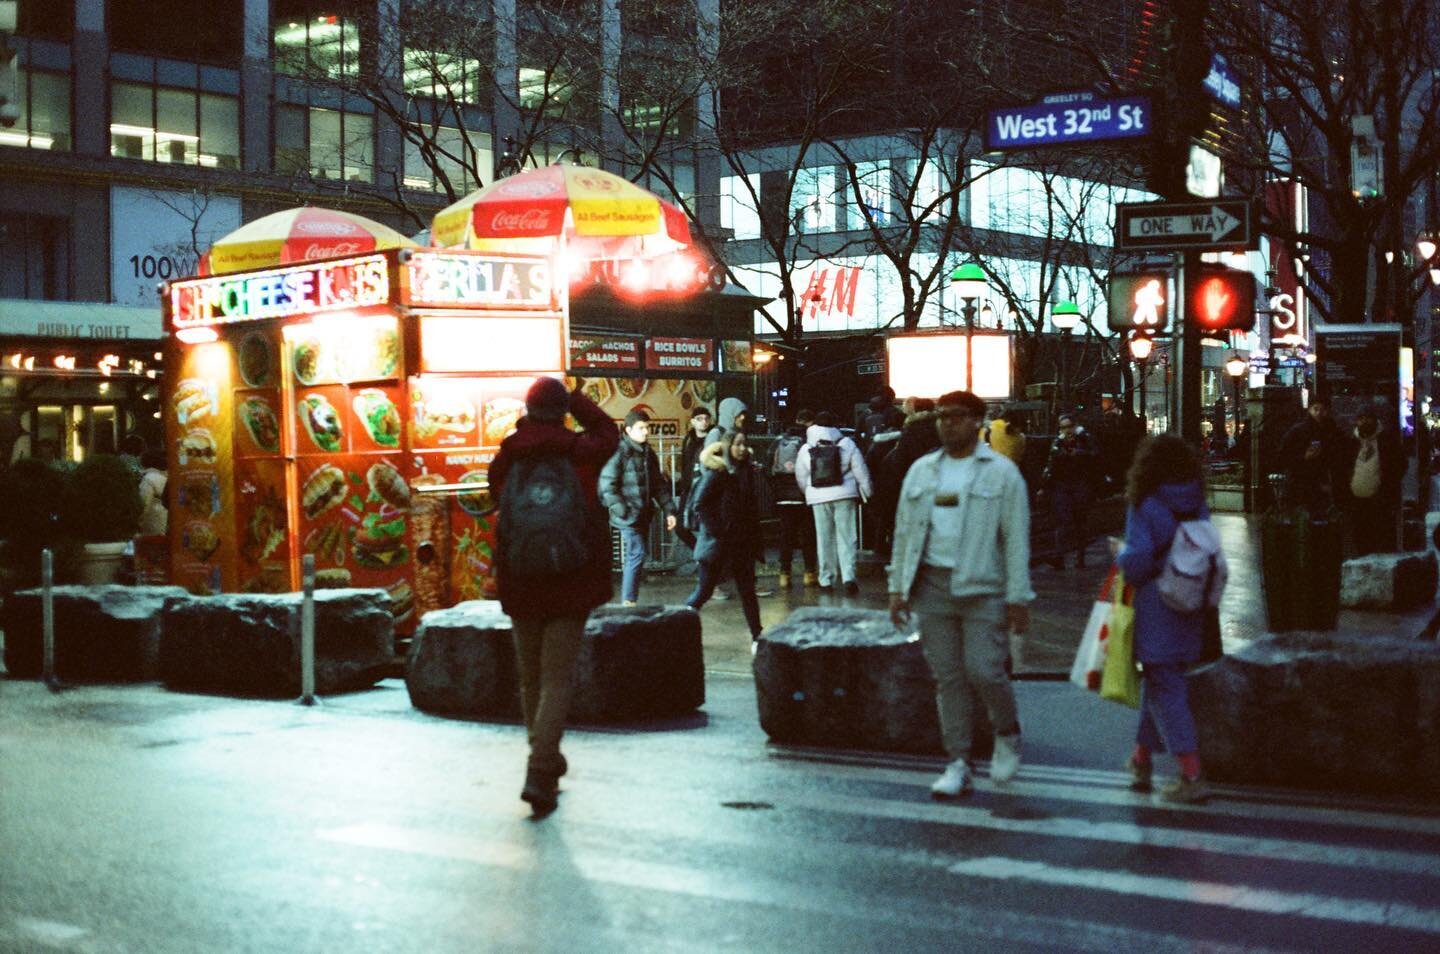 Herald Square and it&rsquo;s food carts. 1-4?
.
.
.
🎞: @cinestillfilm 800T
Dev and scan: @contactphotolabnyc 
.
.
.
.
.
.
.
.
.
.
.
.
.
#minoltagang #filmphotography #nycspc #filmisnotdead #spicollective #timeoutnewyork #analogphotography #filmcommu